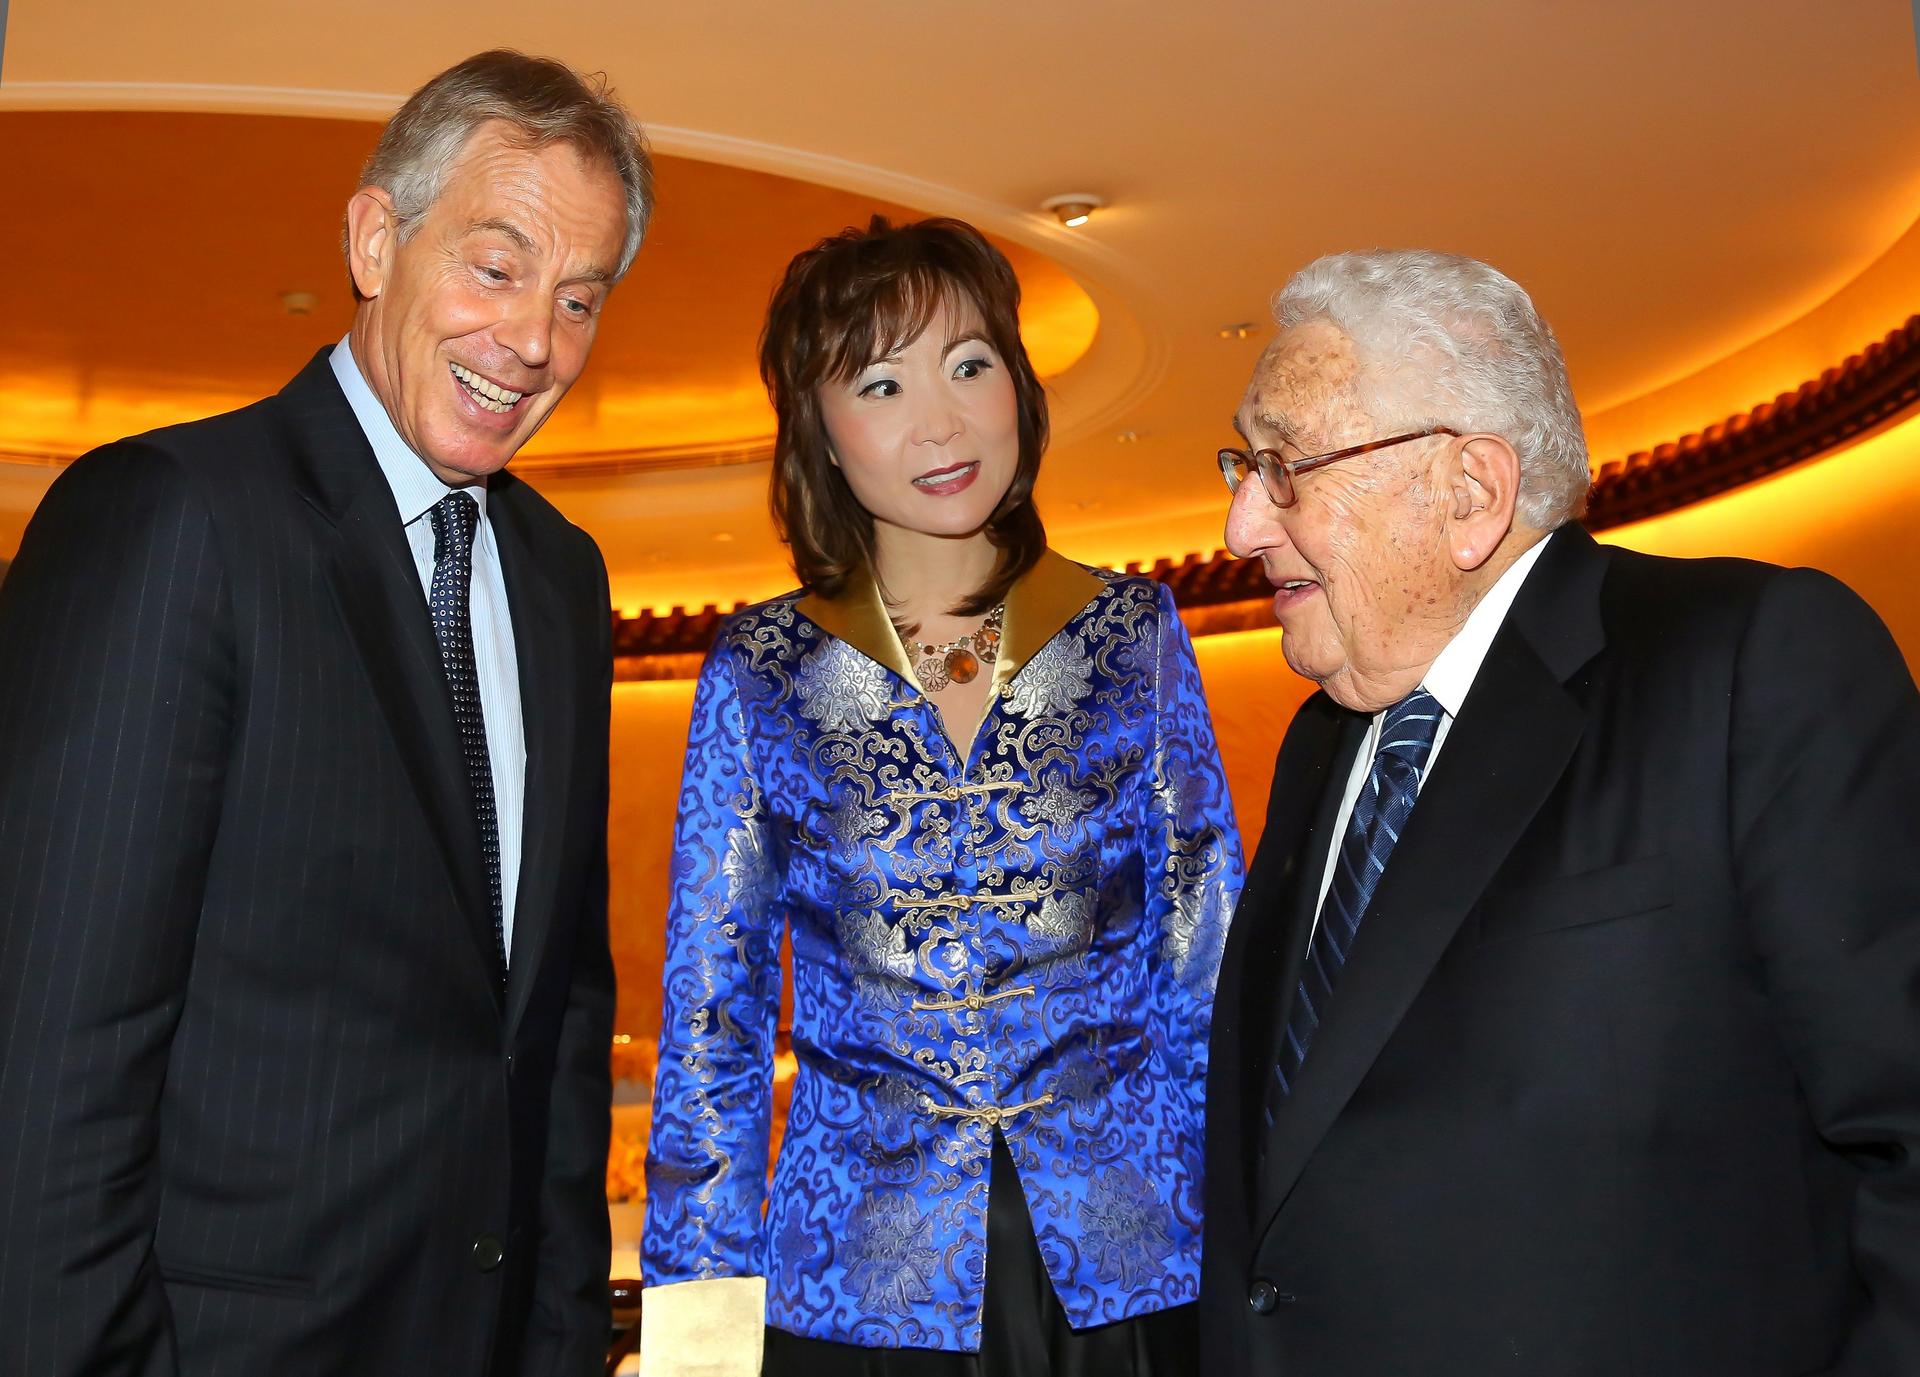 Jing Ulrich with former British prime minister Tony Blair and former US secretary of state Henry Kissinger at a JPMorgan conference.